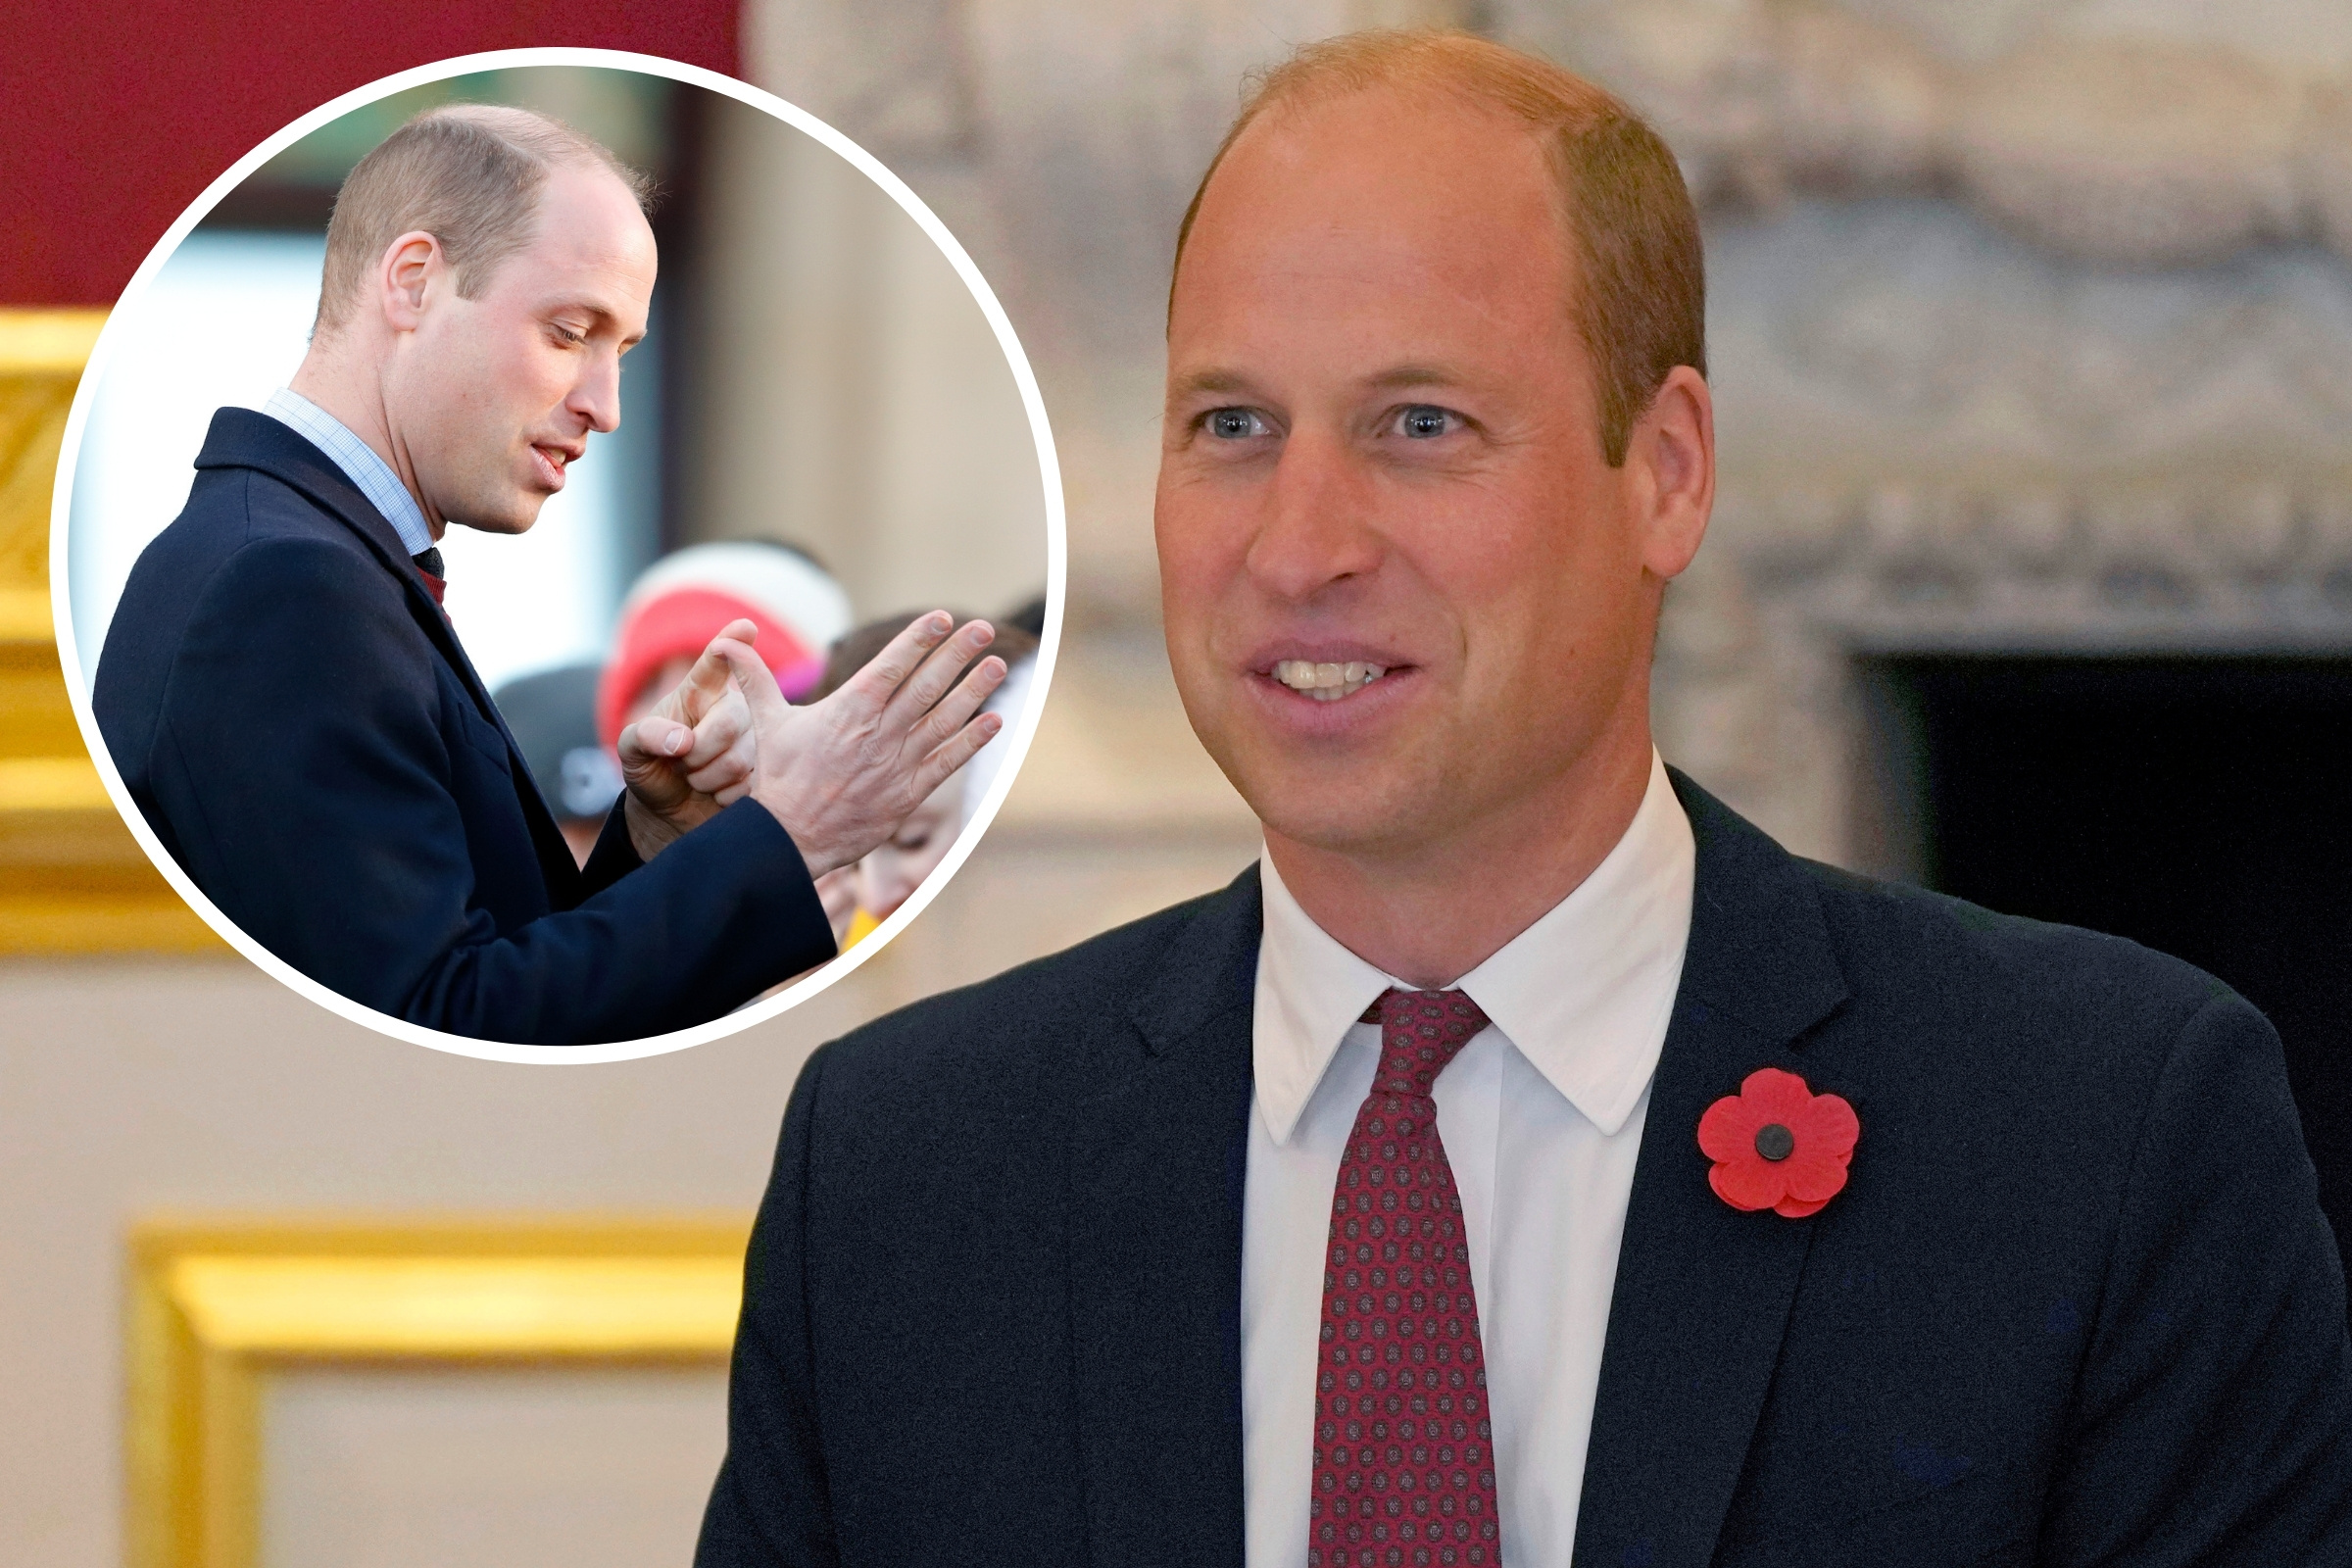 Prince William Praised for Learning Sign Language in Resurfaced Clip